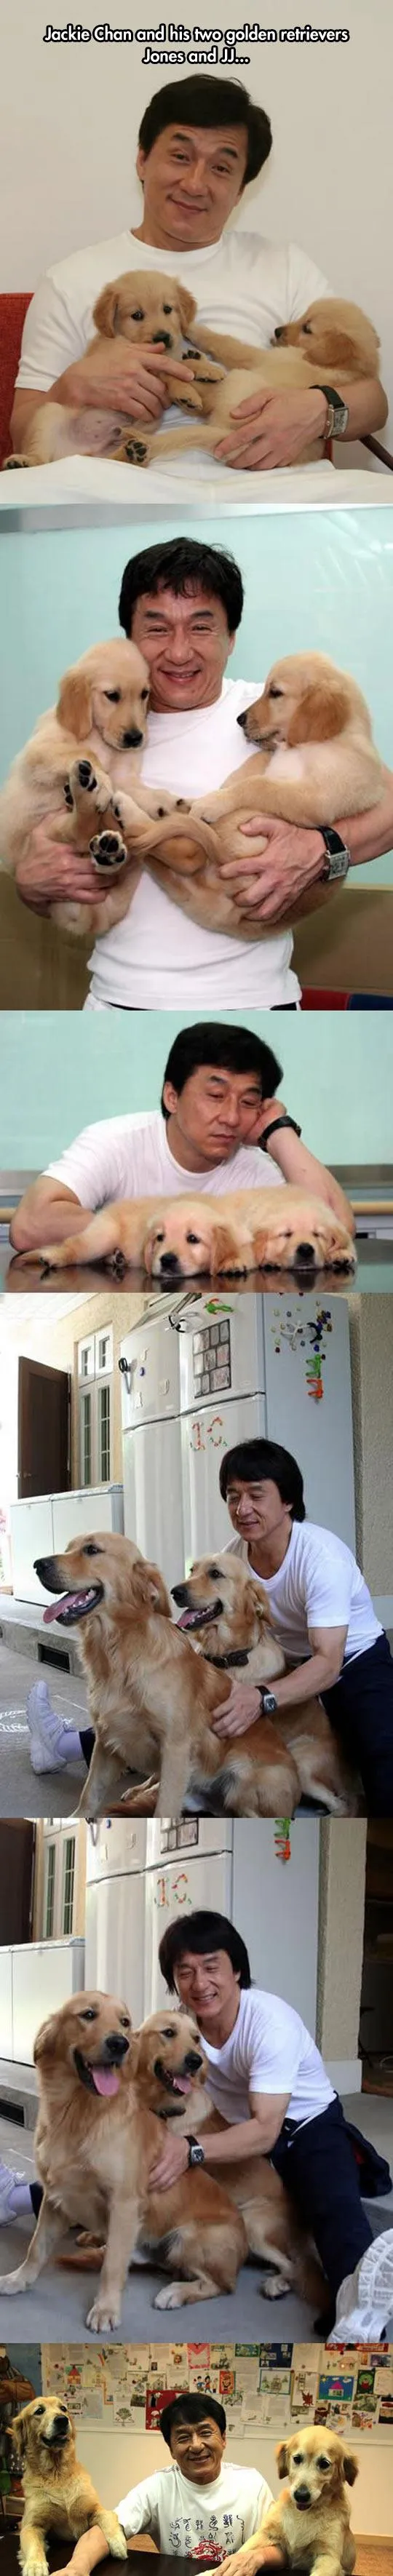 Jackie Chan has golden puppers.